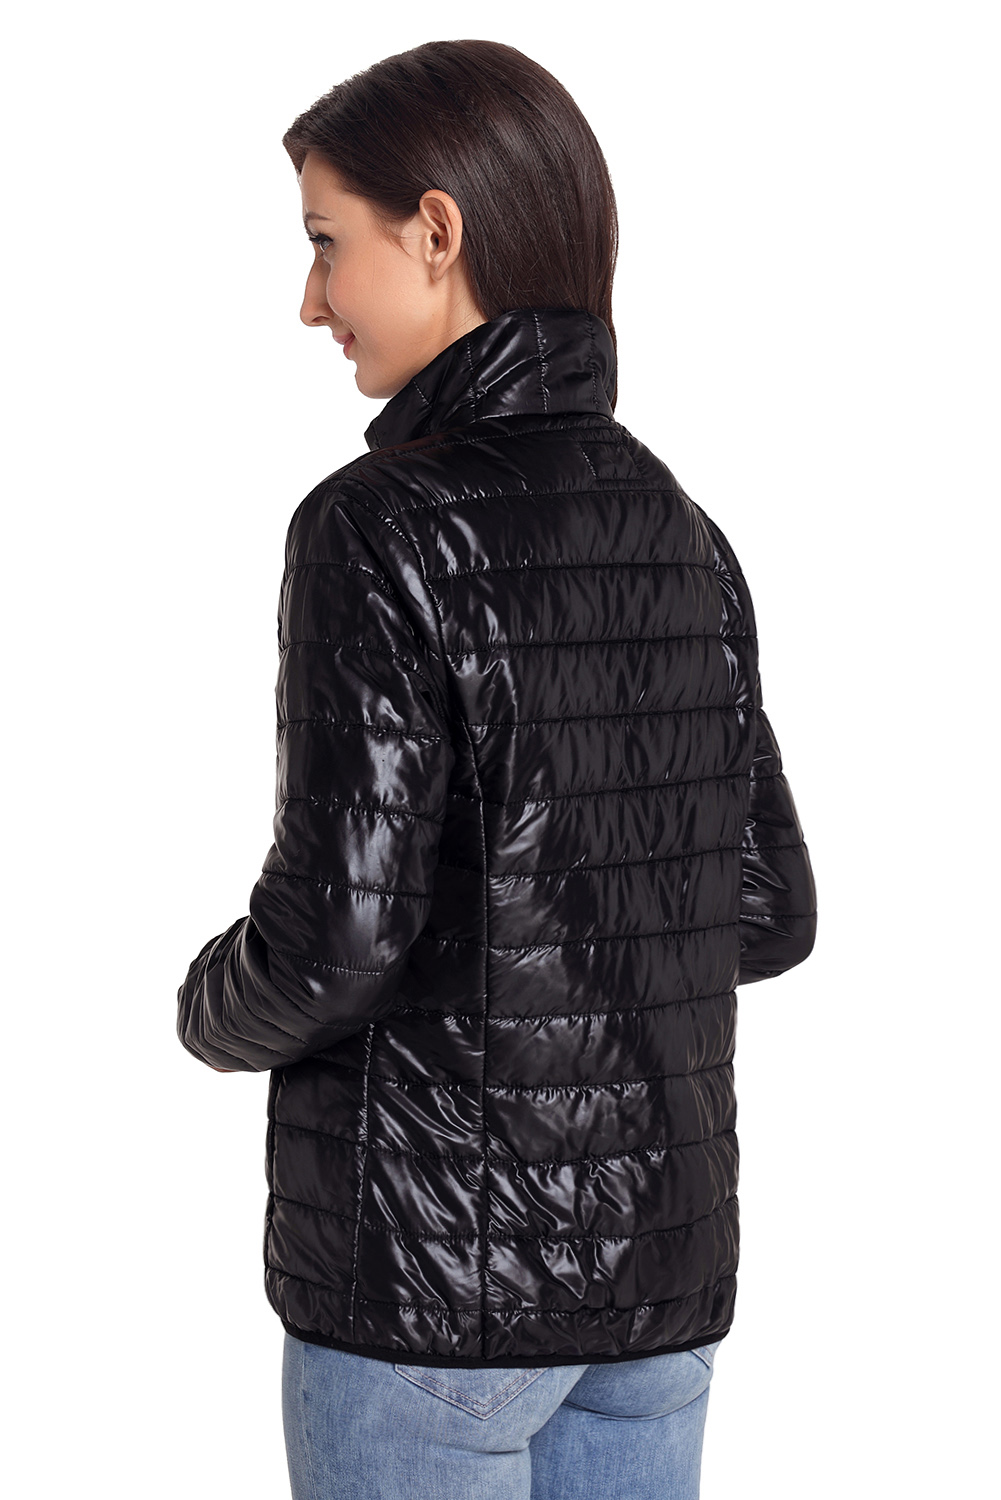 BY85126-2 Black High Neck Quilted Cotton Jacket